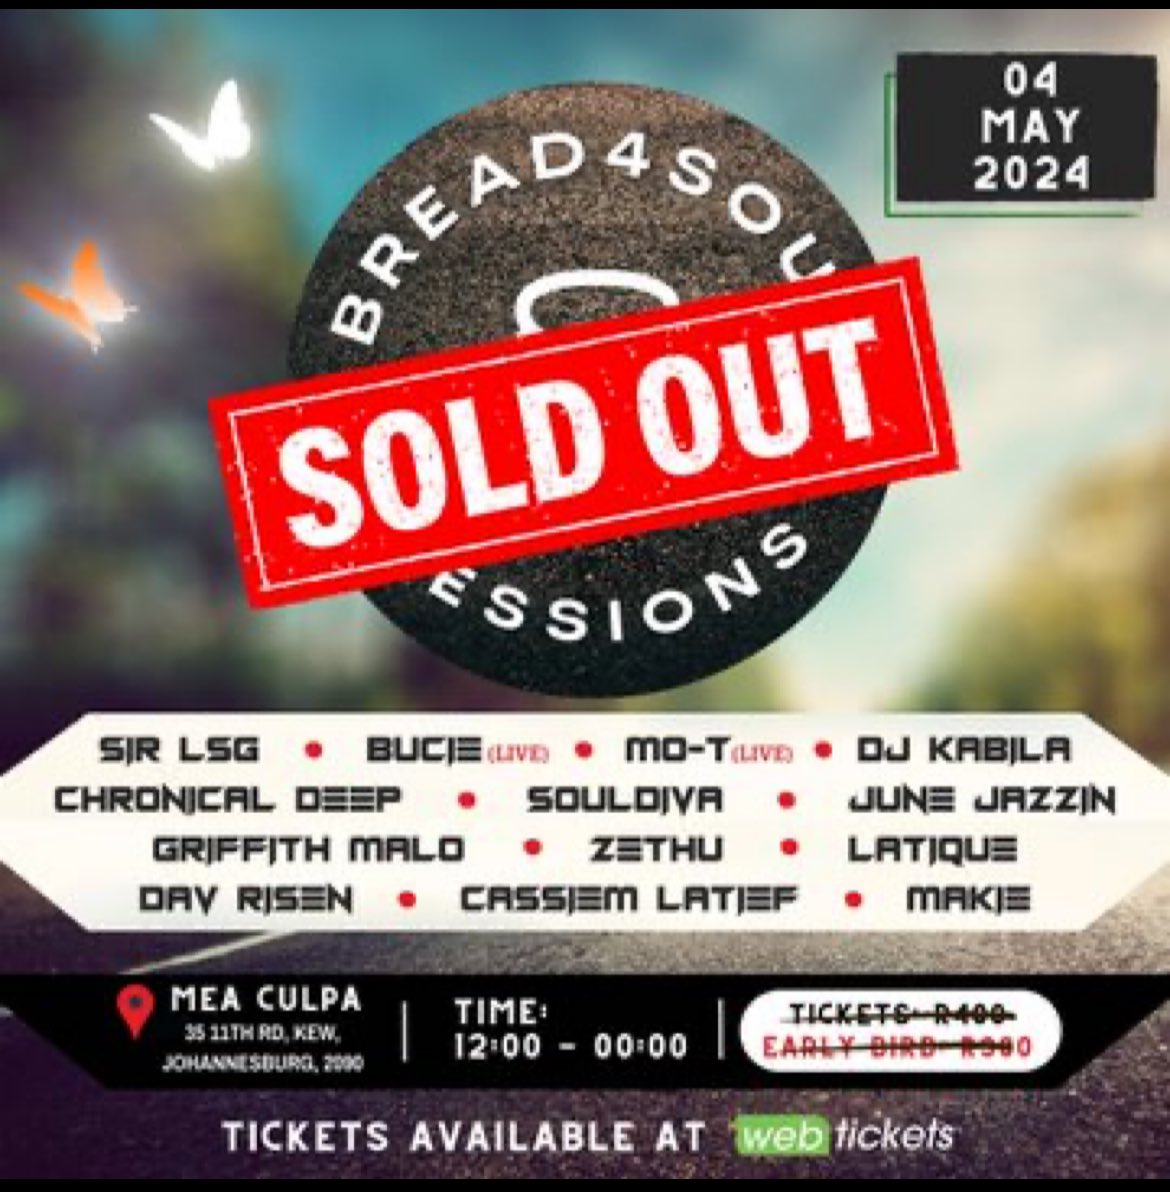 Anyone interested in buying tickets for this event I have three tickets and selling them for R300 each. Reason for selling I’m not able to attend… please hala if you interested. 
@SirLSG_SA #Bread4Soul #DeepHouseMusic